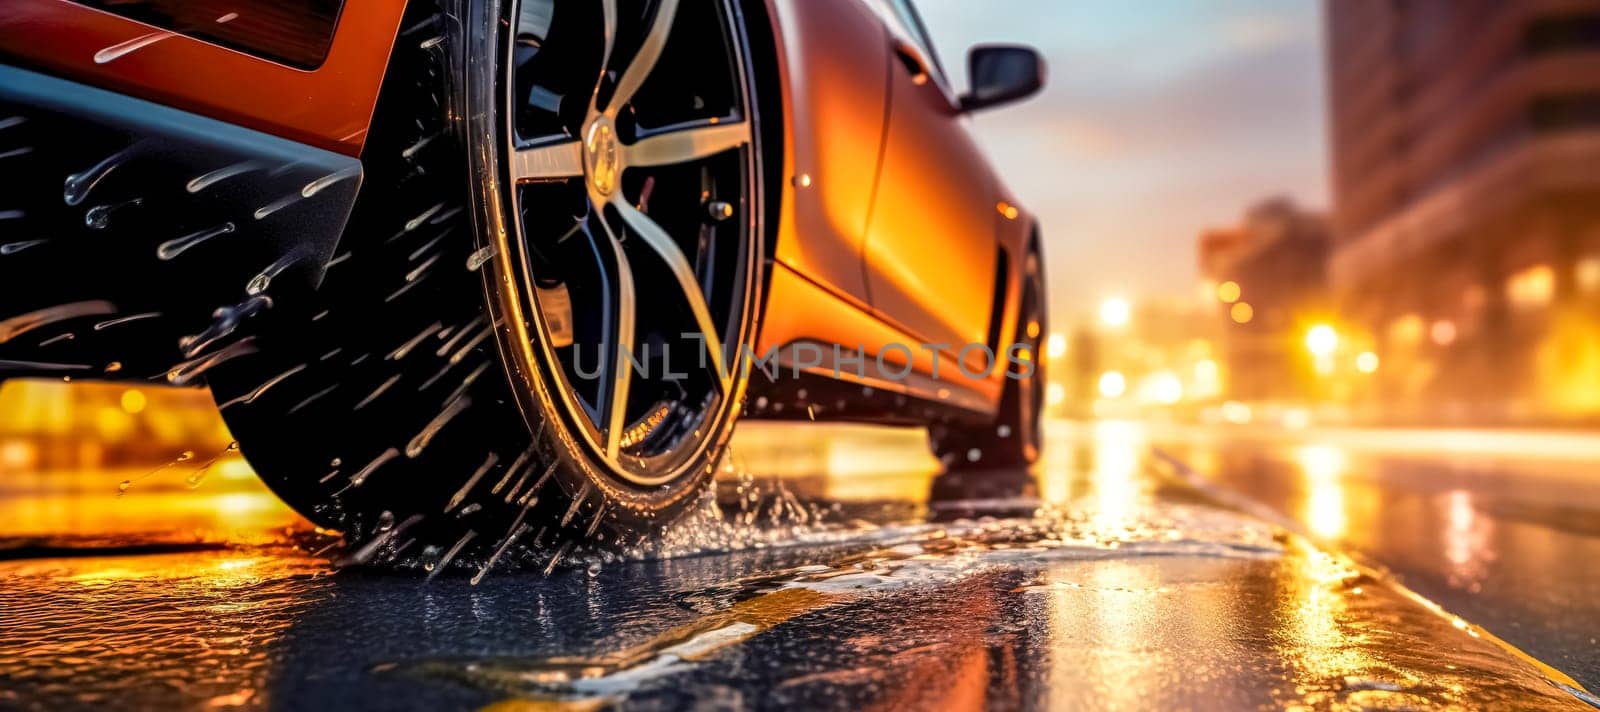 sleek car's tire on a wet road, with water splashing around as it moves, reflecting the city lights in the evening, banner